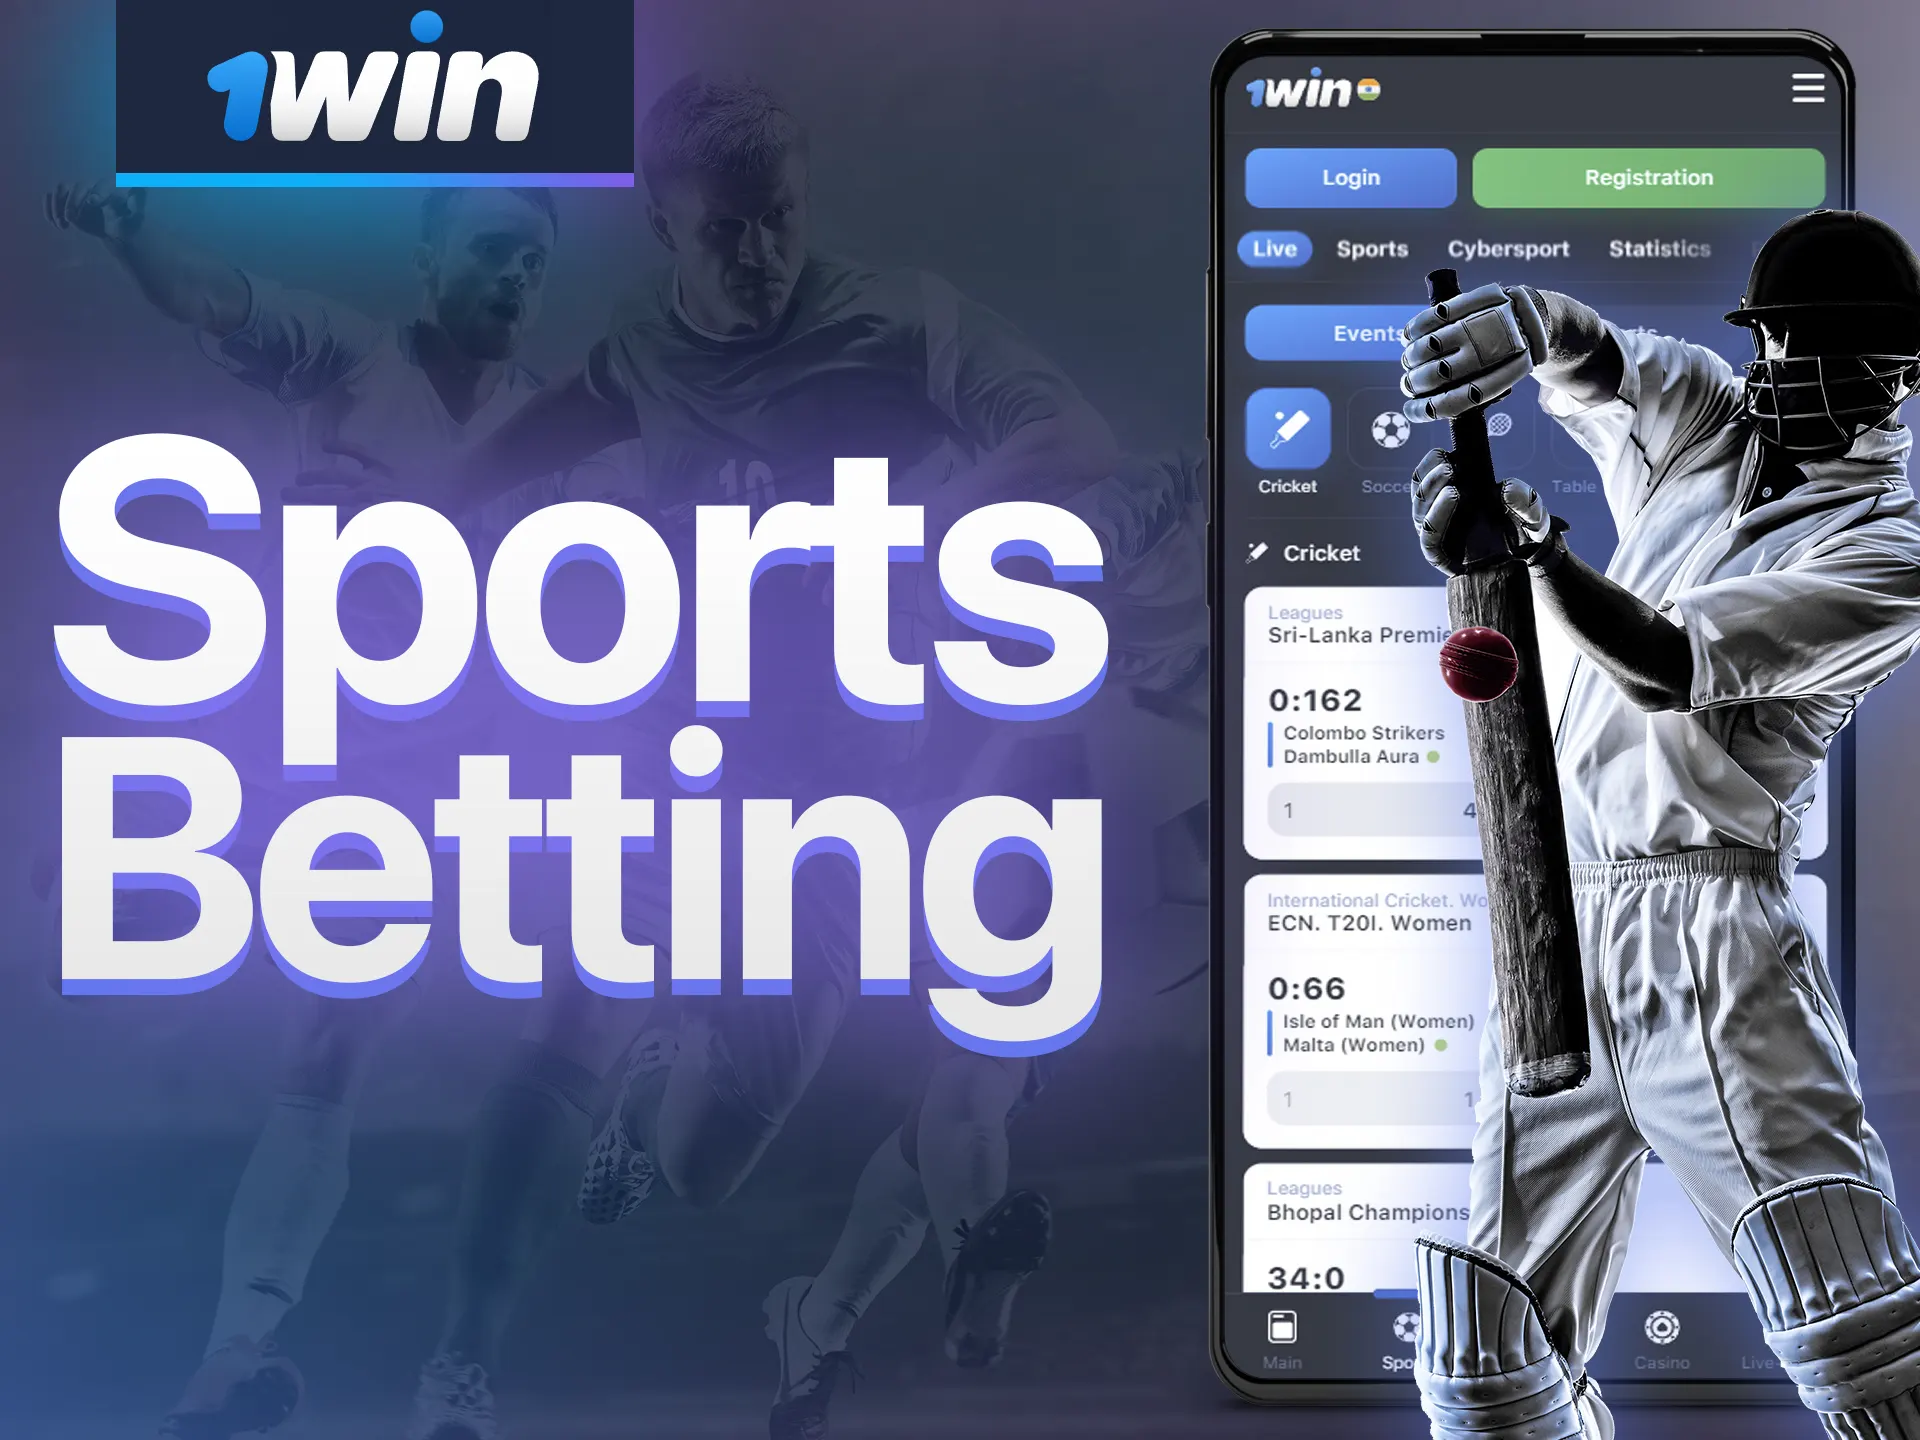 The app offers a wide range of sports and cyber sports to bet on.